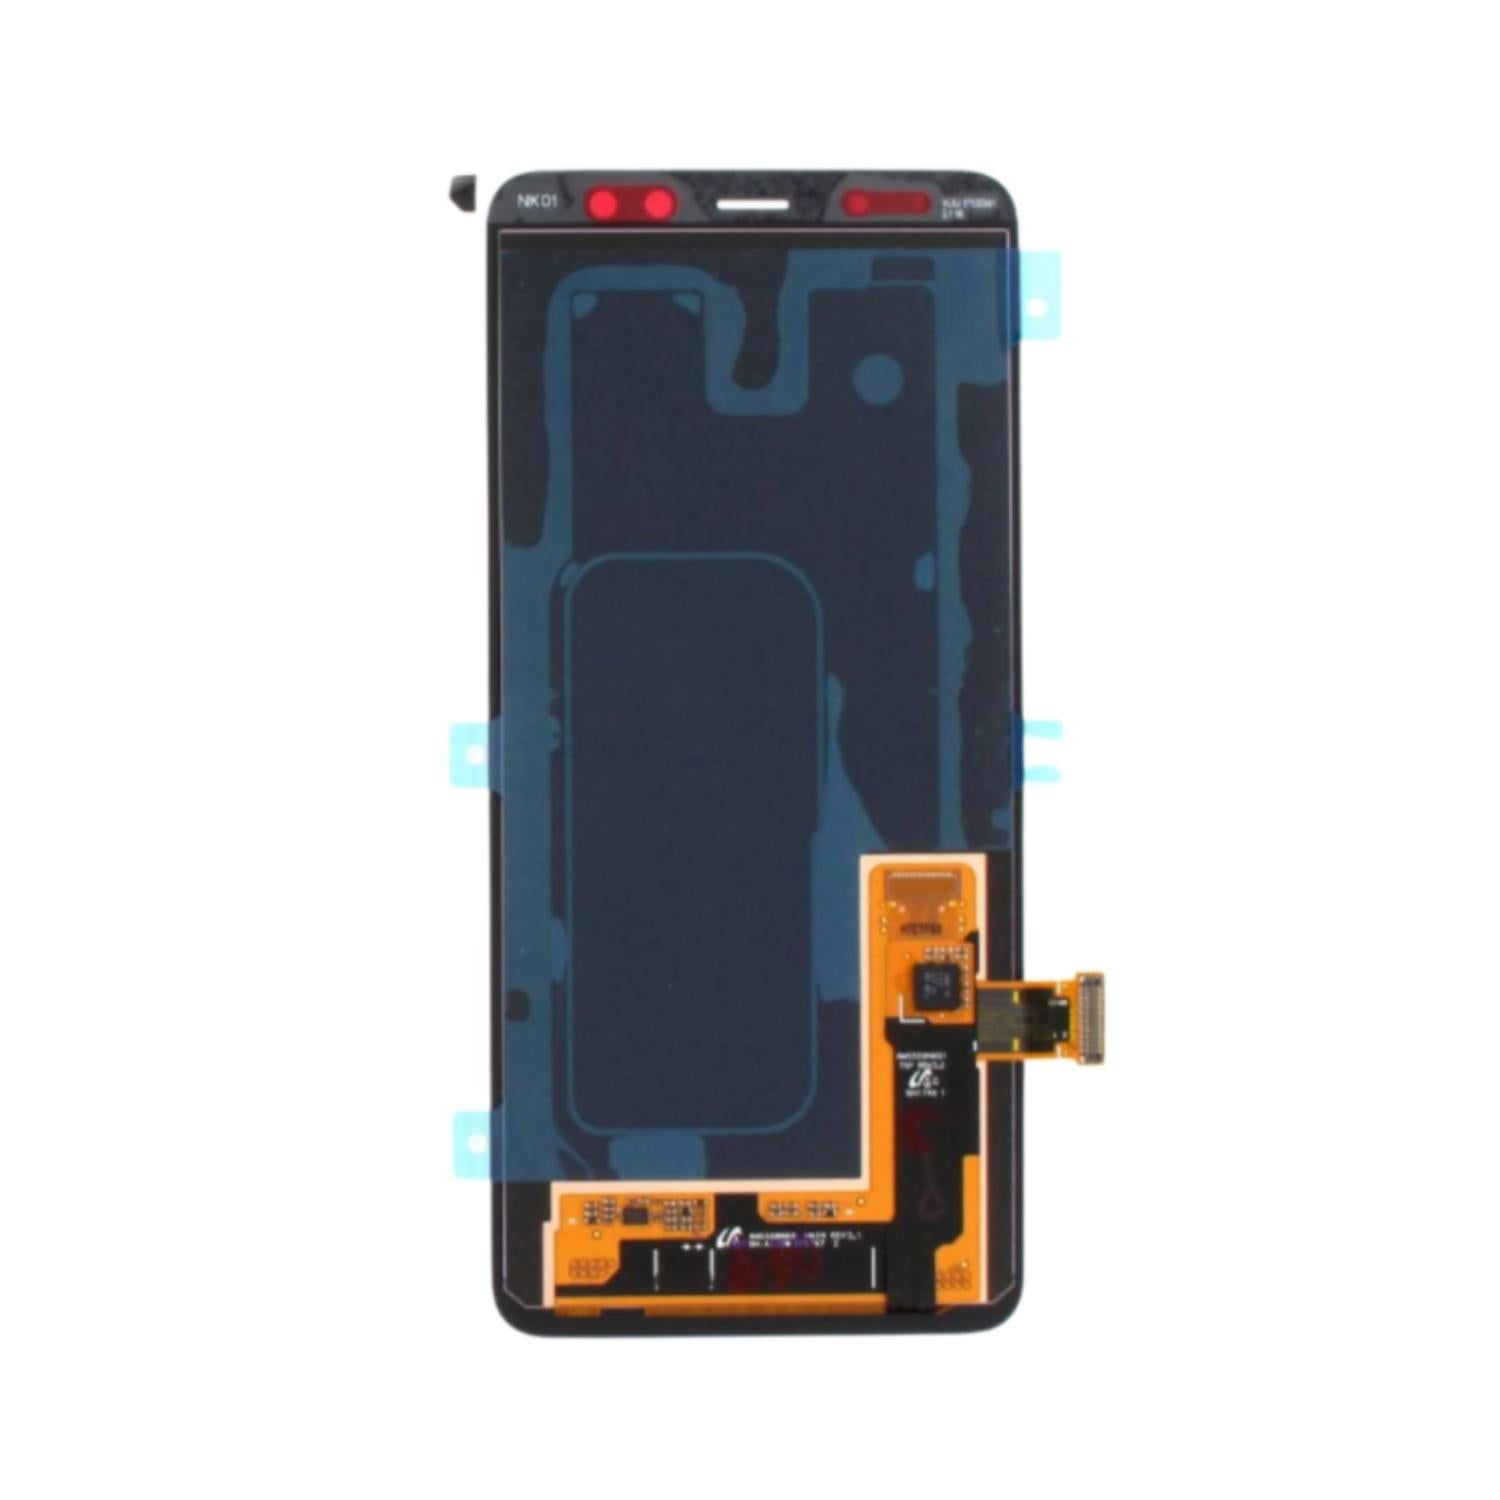 OLED and Digitizer Assembly for Samsung Galaxy A8 (A530) (without Frame) (Refurbished)